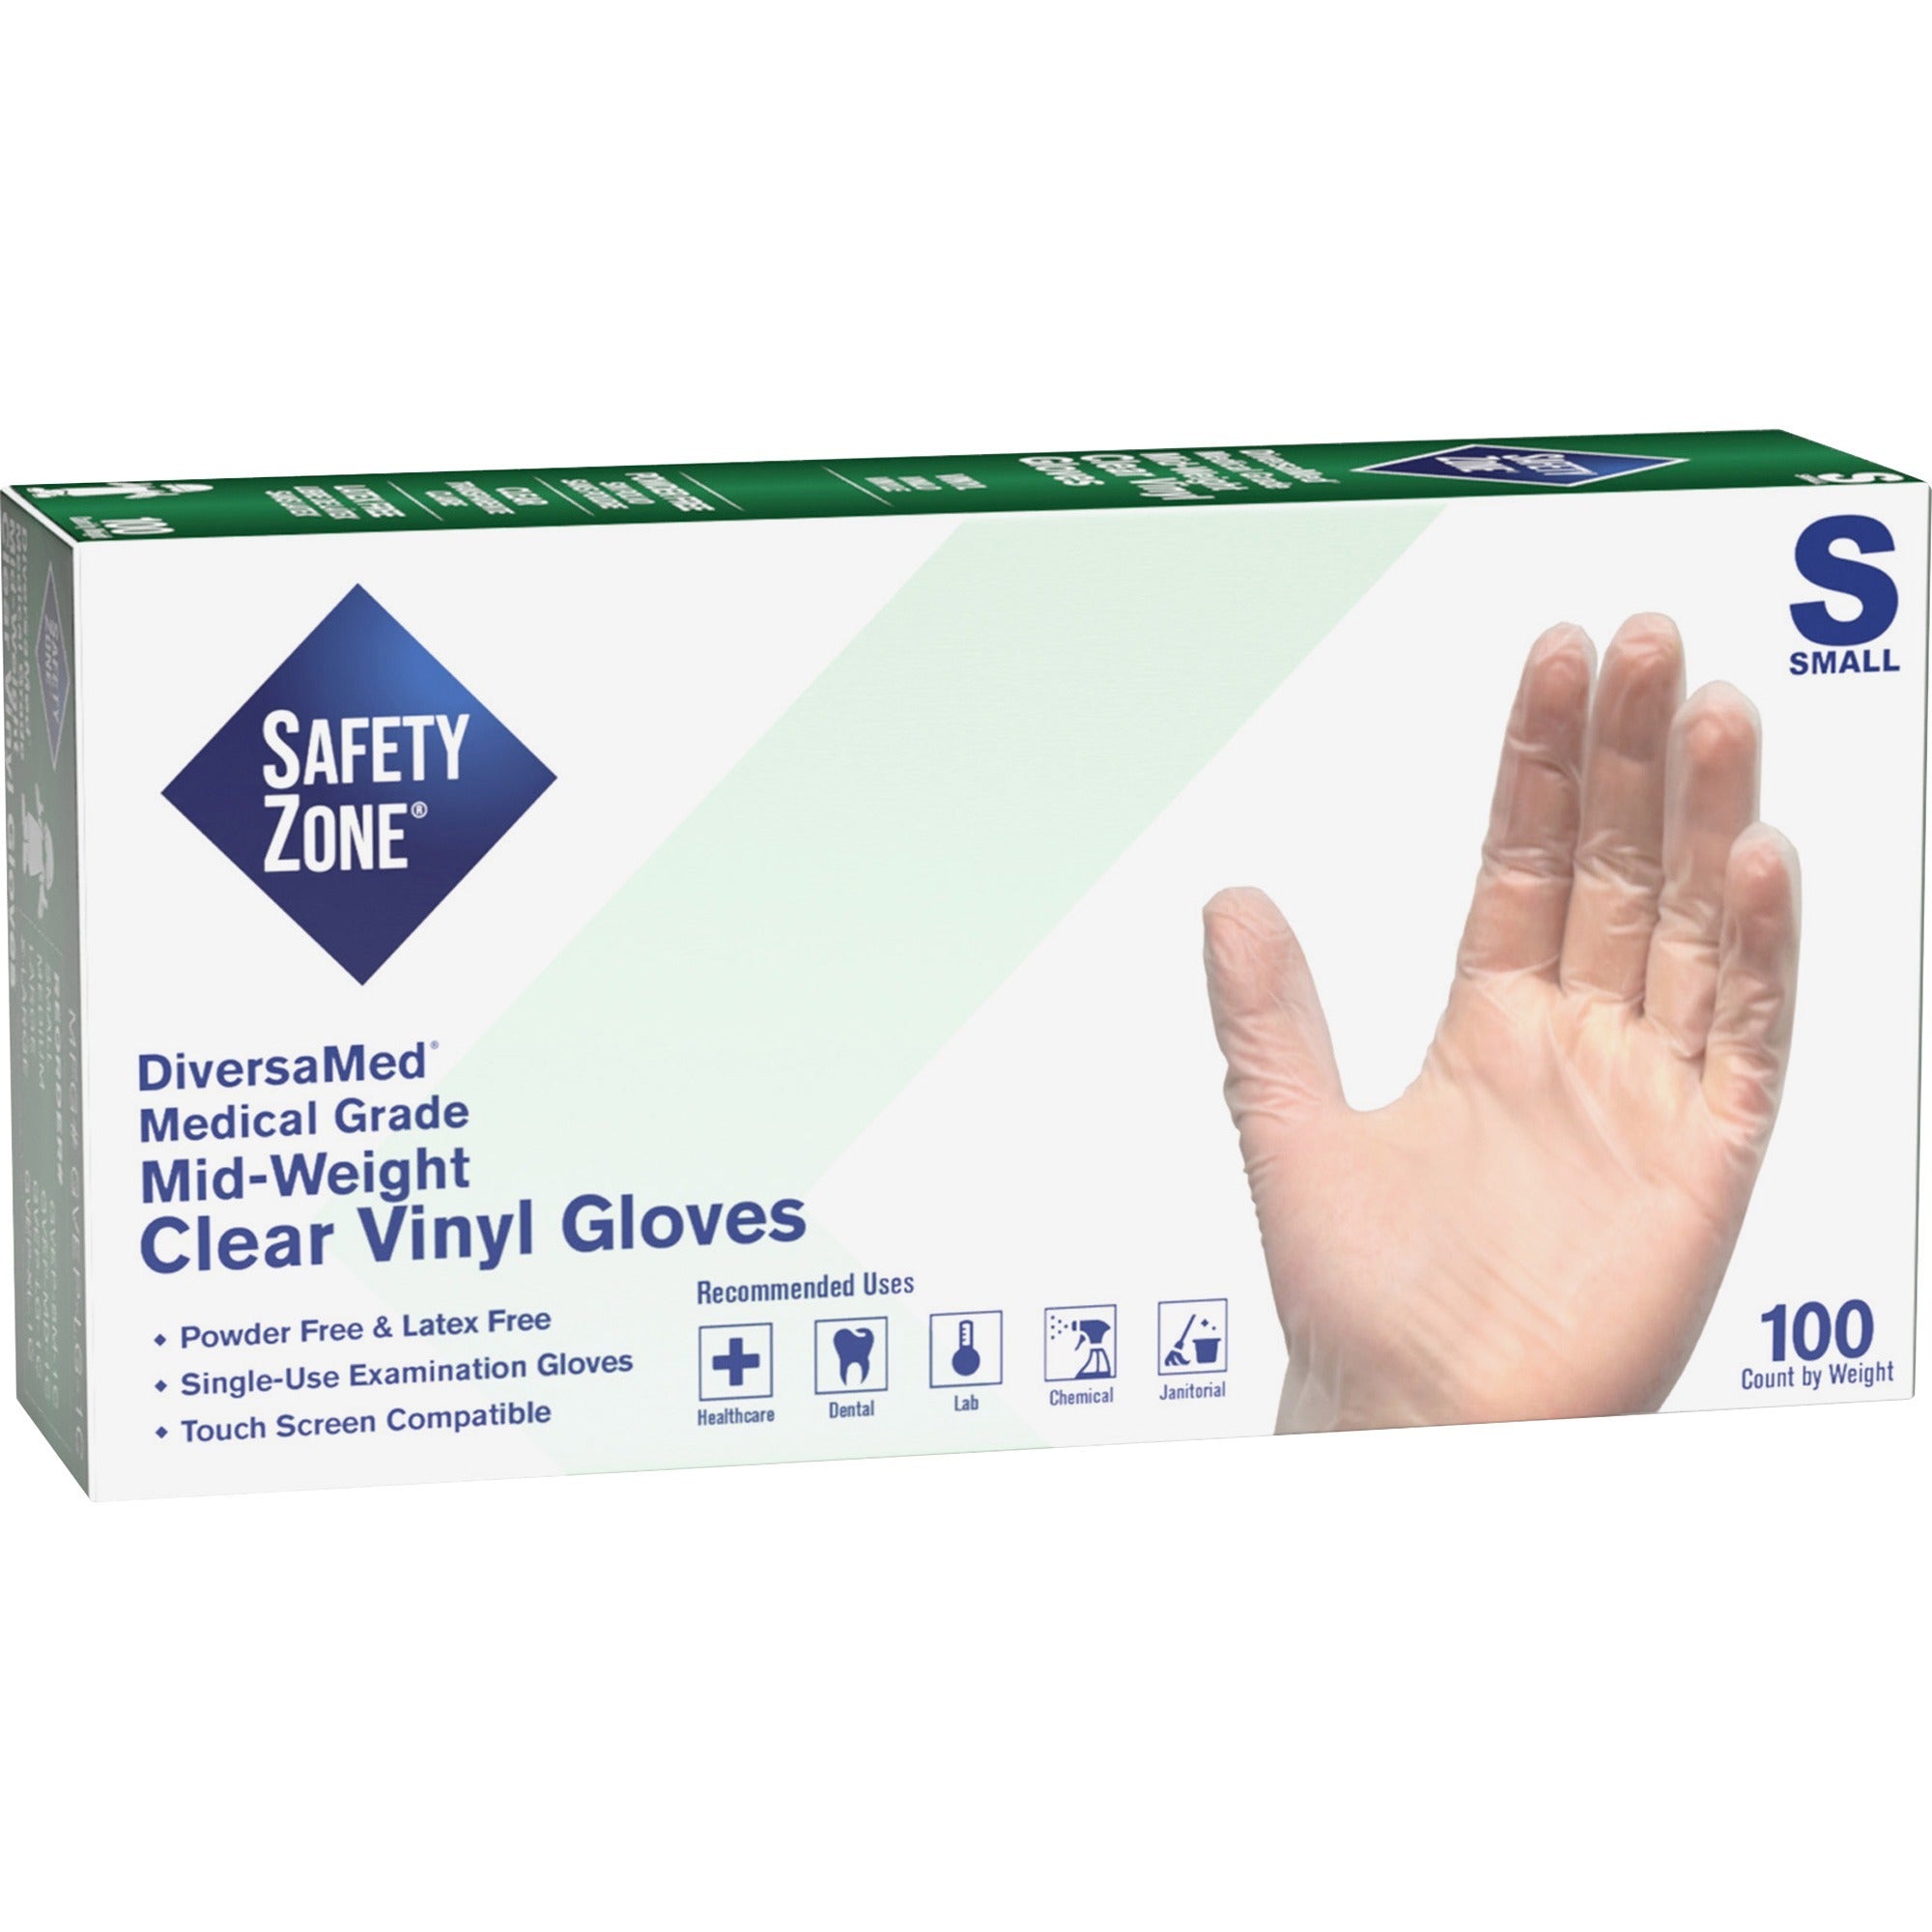 Safety Zone Powder Free Clear Vinyl Gloves - Small Size - Unisex - Clear - Latex-free, Comfortable, Allergen-free, Silicone-free, DINP-free, DEHP-free - For General Purpose, Cleaning, Food, Janitorial Use, Cosmetics, Painting, Pet Care - 9.25" Glove